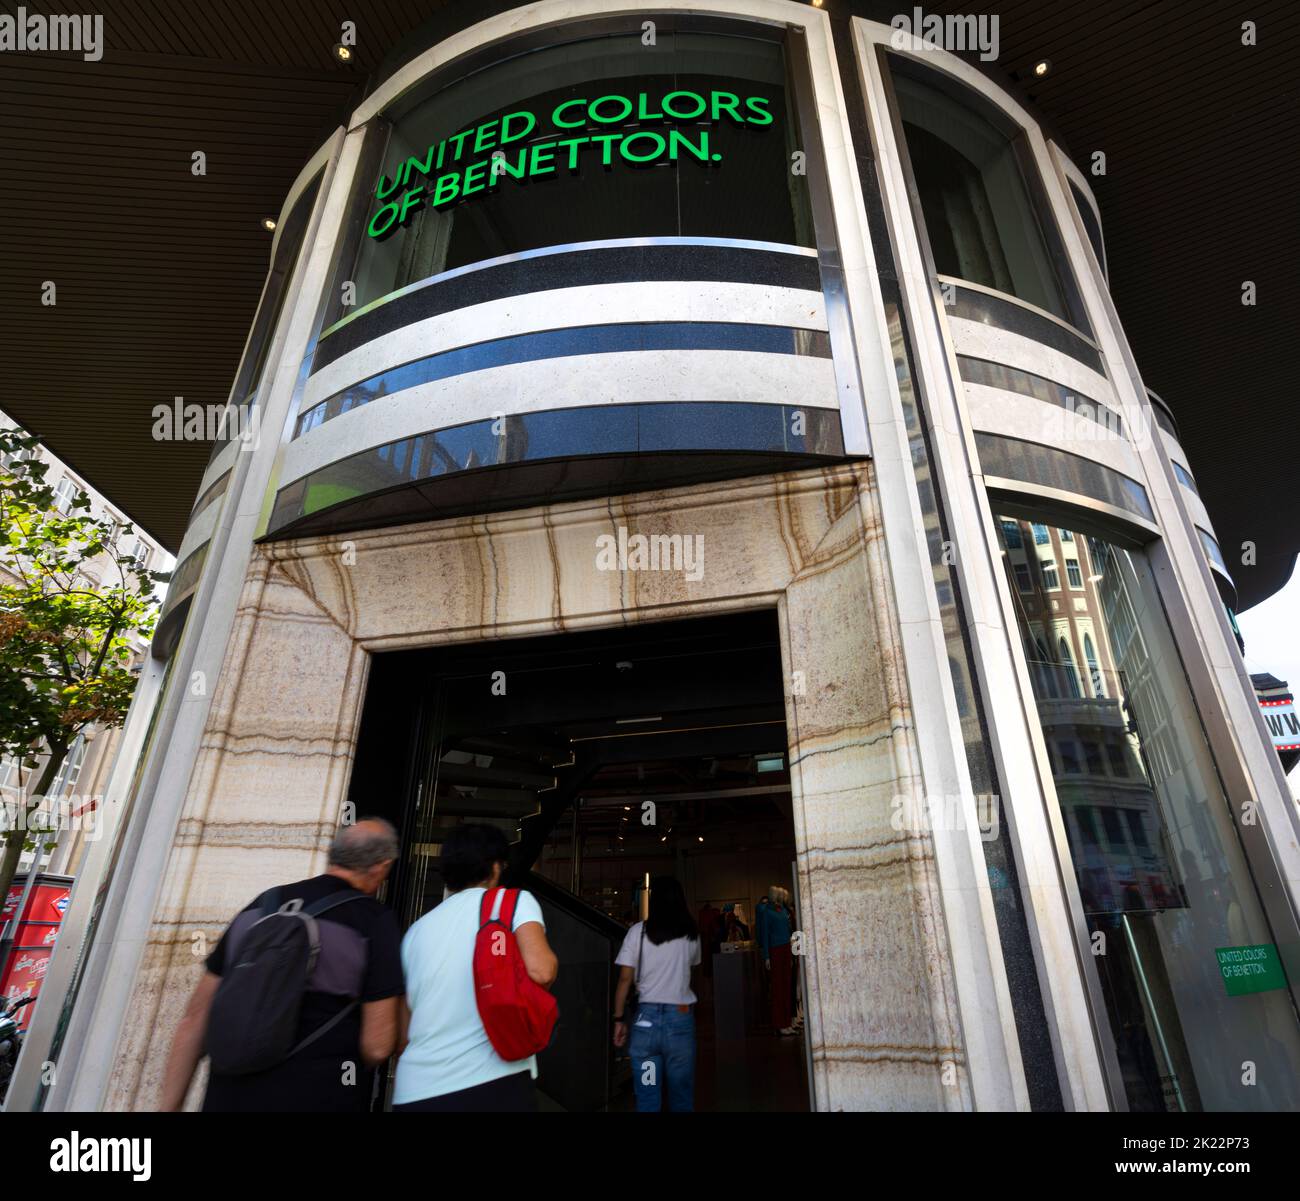 Madrid, Spain. September 2022. External view of the United Colors of Benetton brand shop in the city center Stock Photo